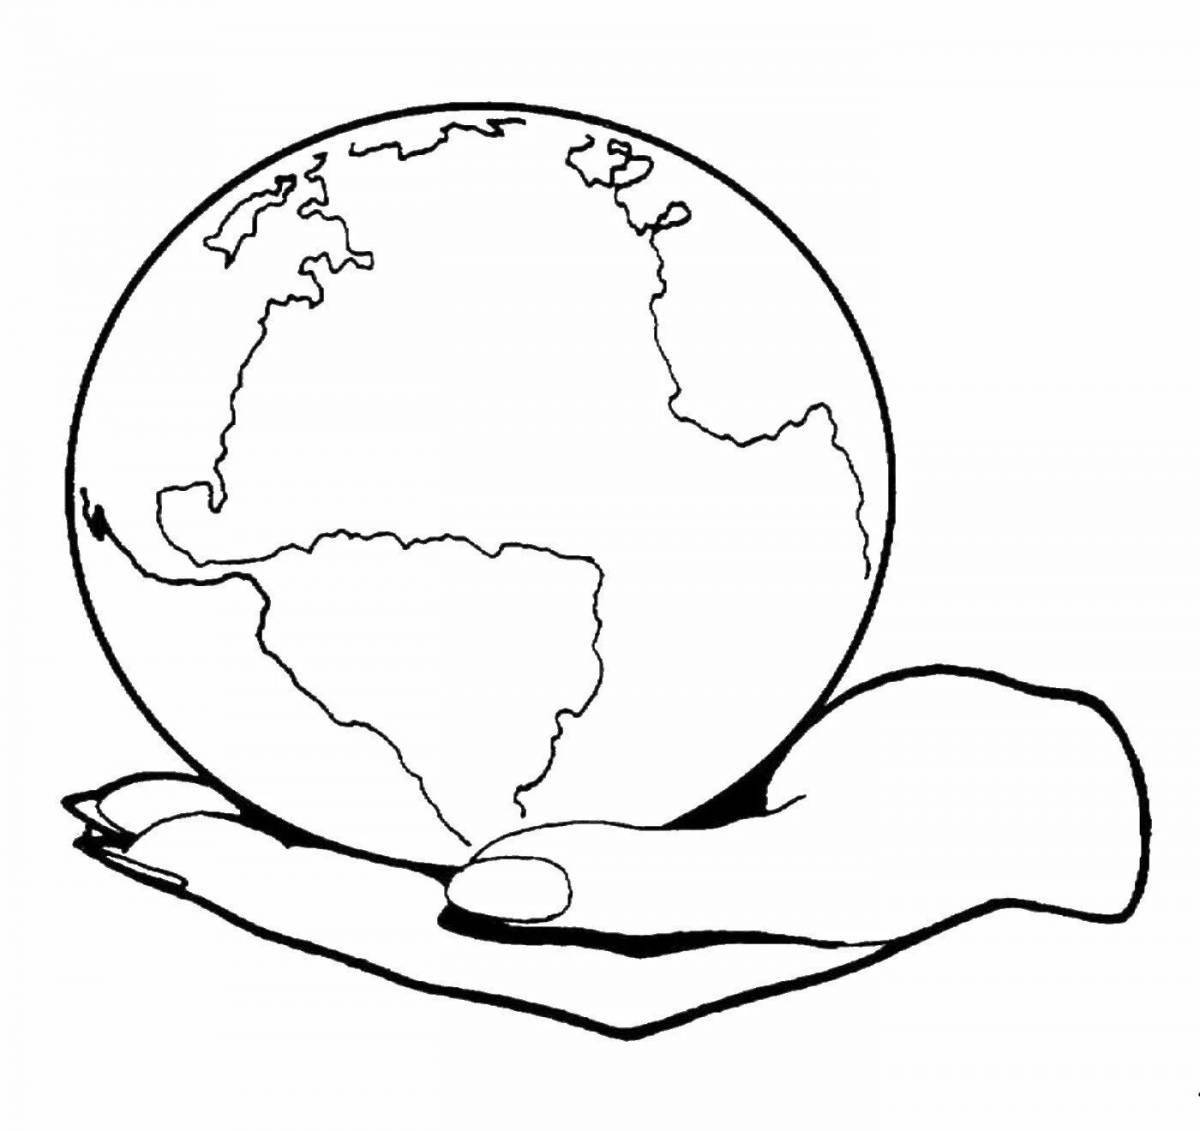 Globe coloring book for kids